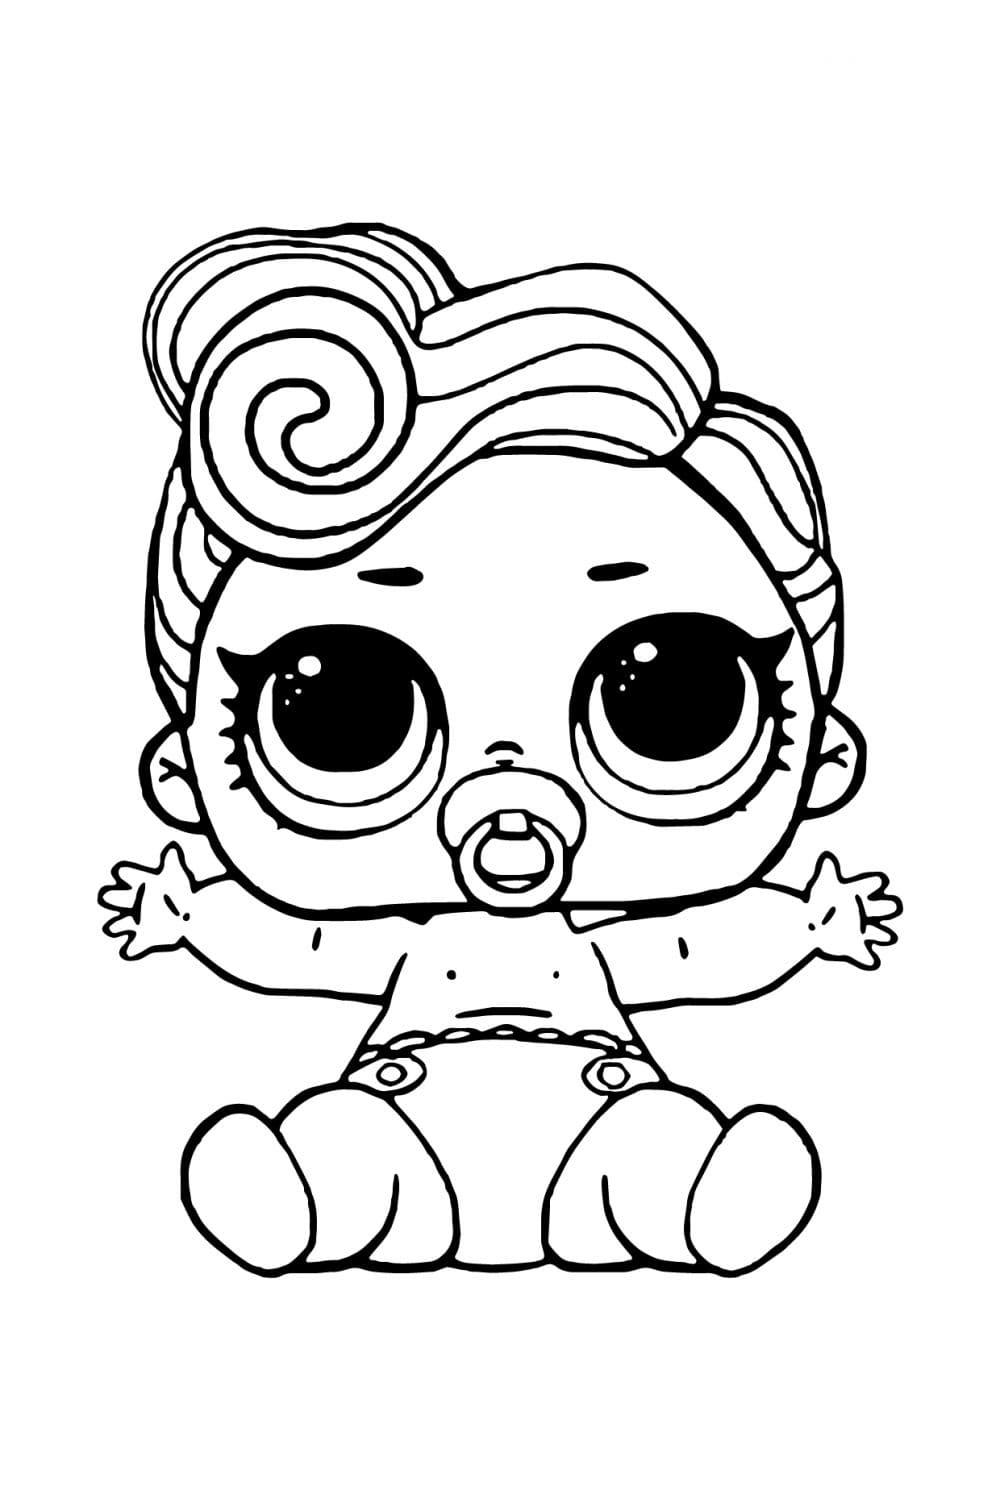 LOL Coloring Pages FREE Printable 151